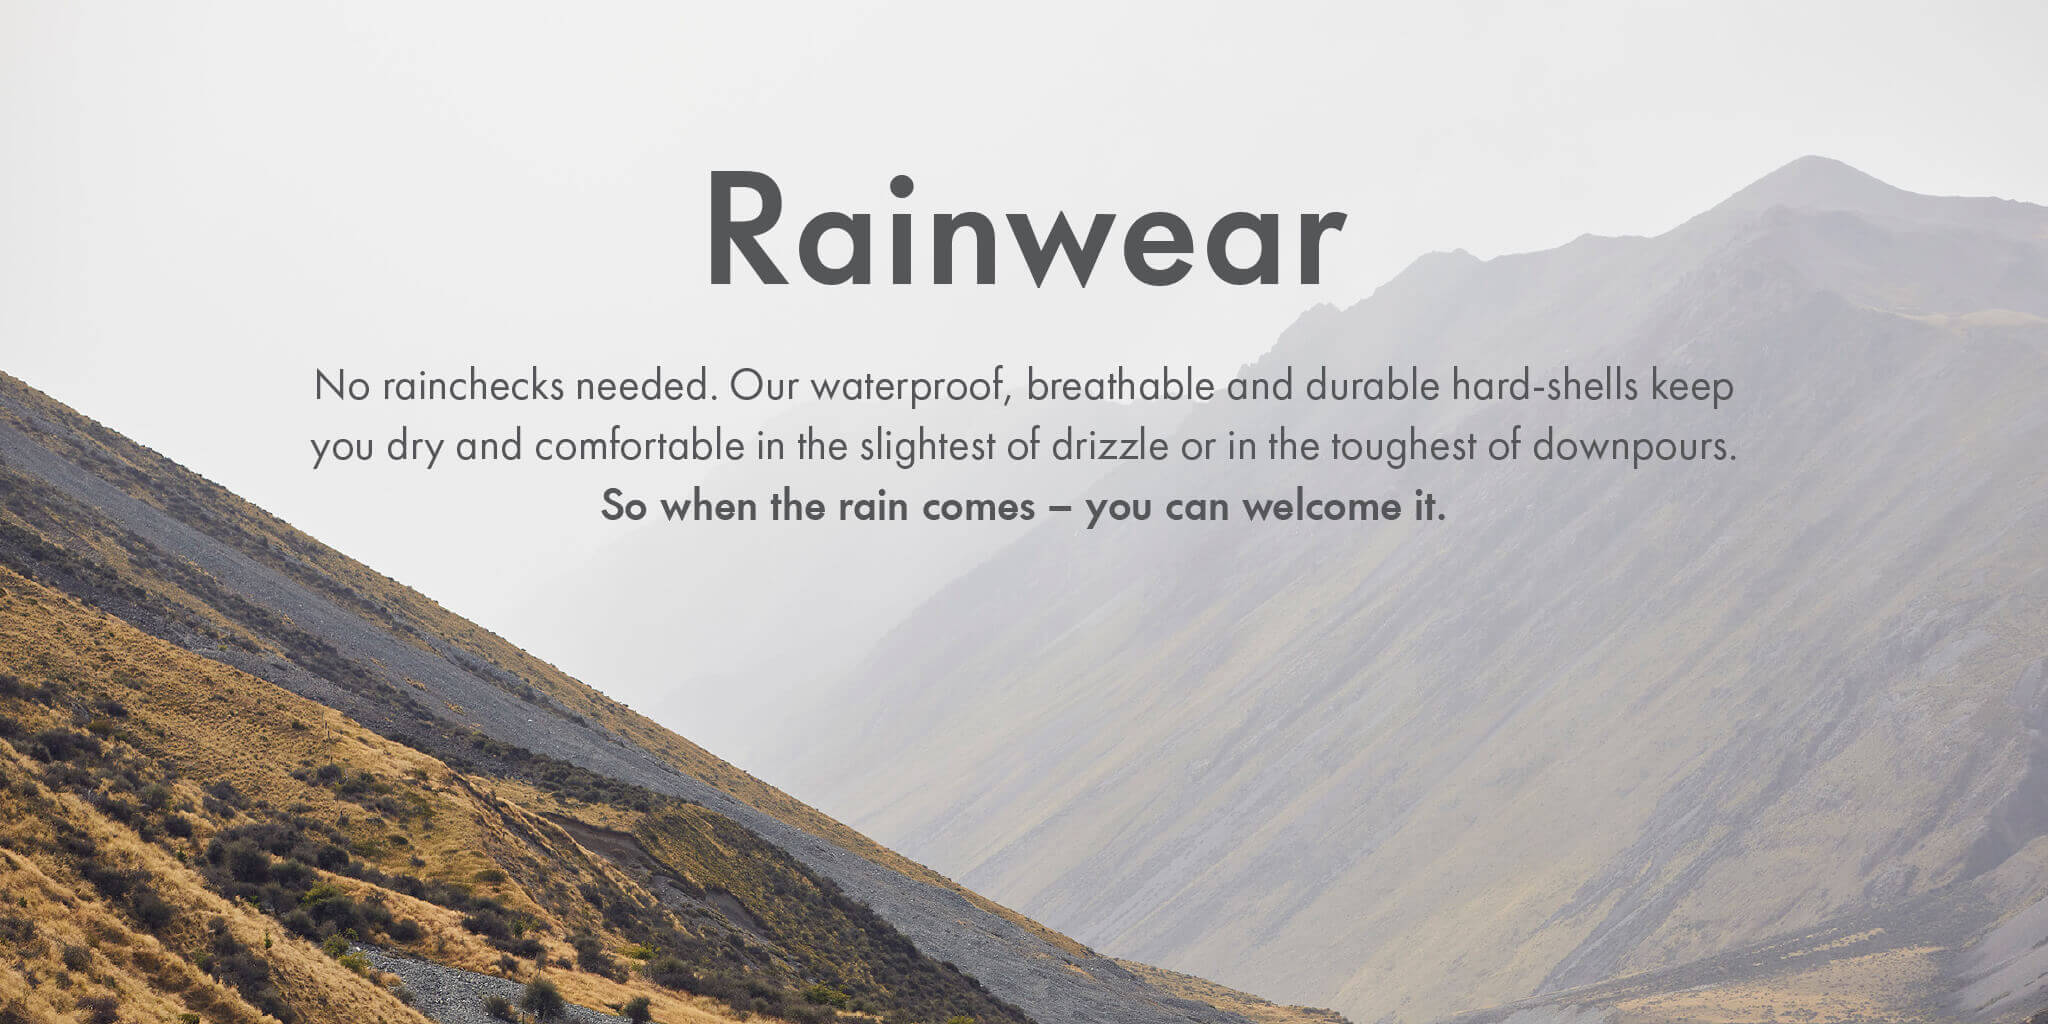 Rainwear - No rainchecks needed. Our waterproof, breathable and durable hard-shells keep you dry and comfortable in slightest of drizzle or in the toughest of downpours.So when the rain comes – you can welcome it.